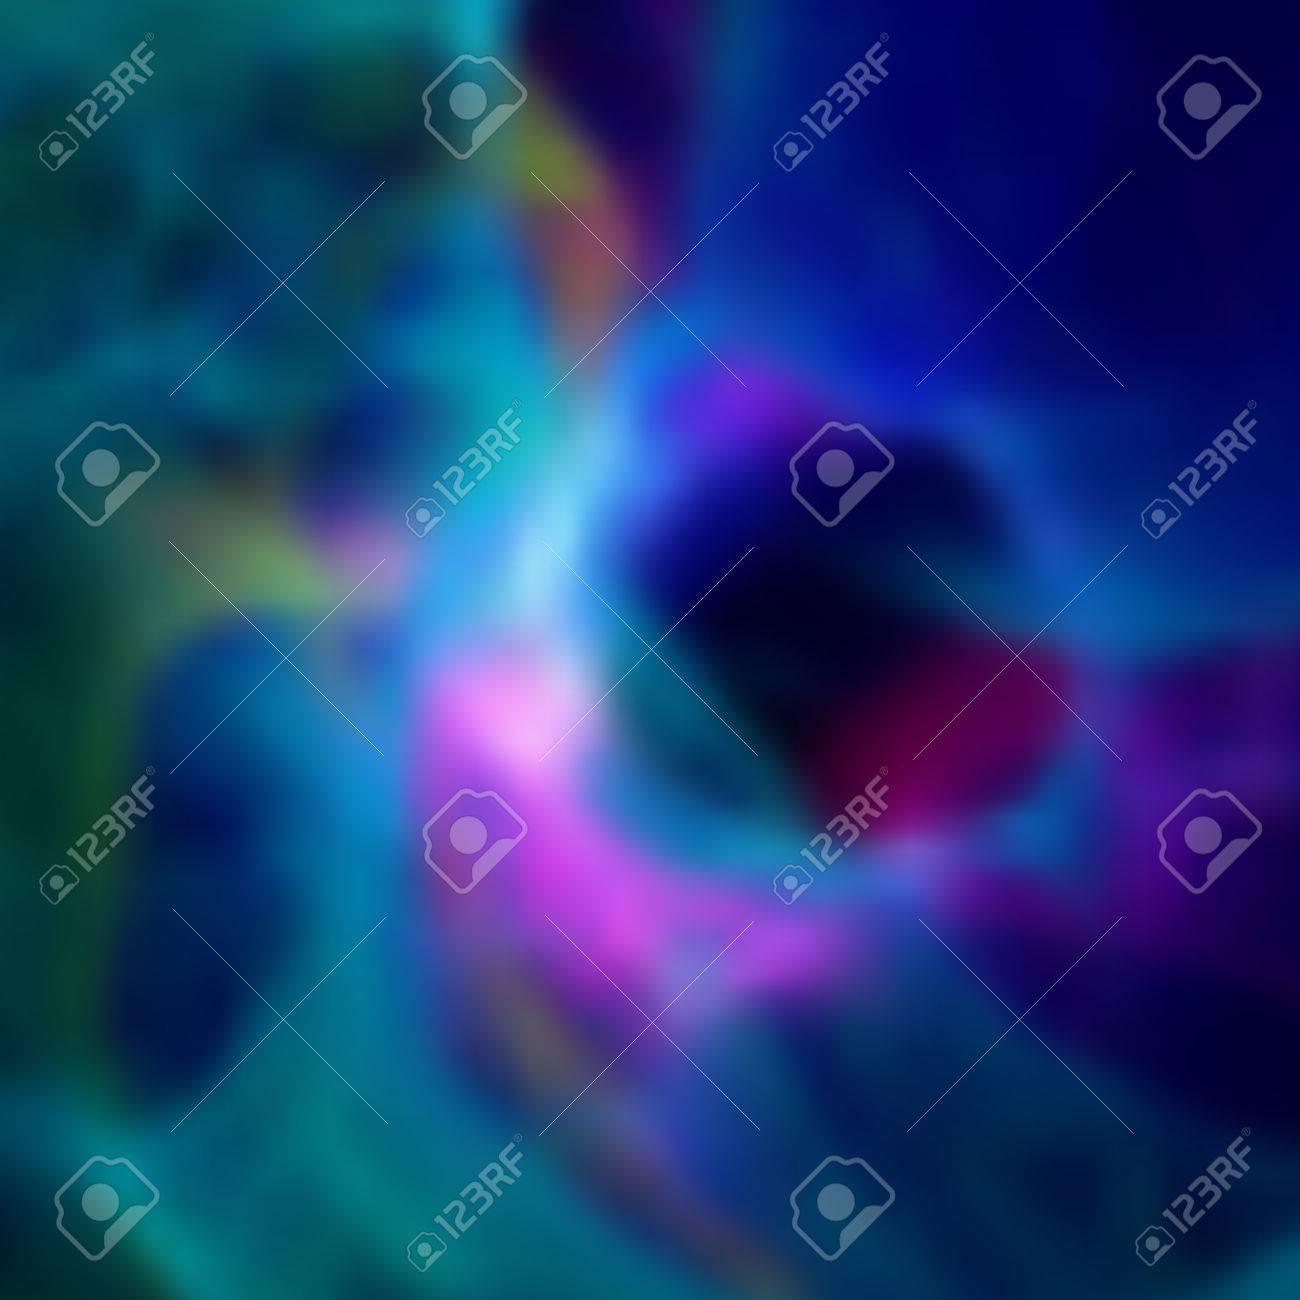 Abstract Blurry Wallpaper With Many Blue Colors Royalty